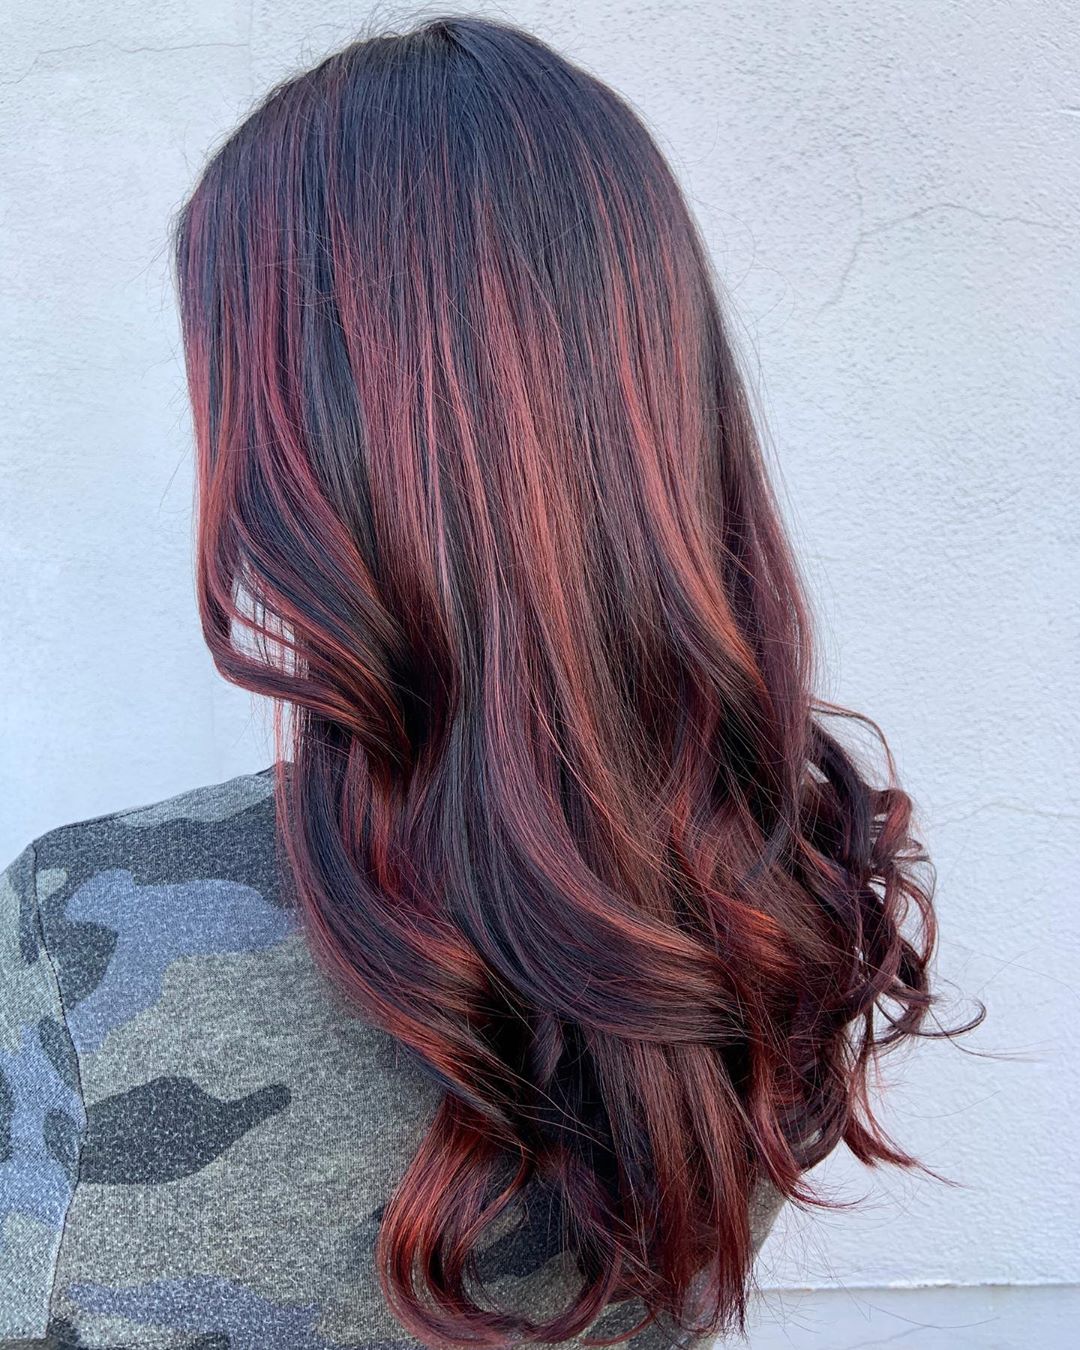 These 21 Dark Hair Colors Are Totally Trending in 2021